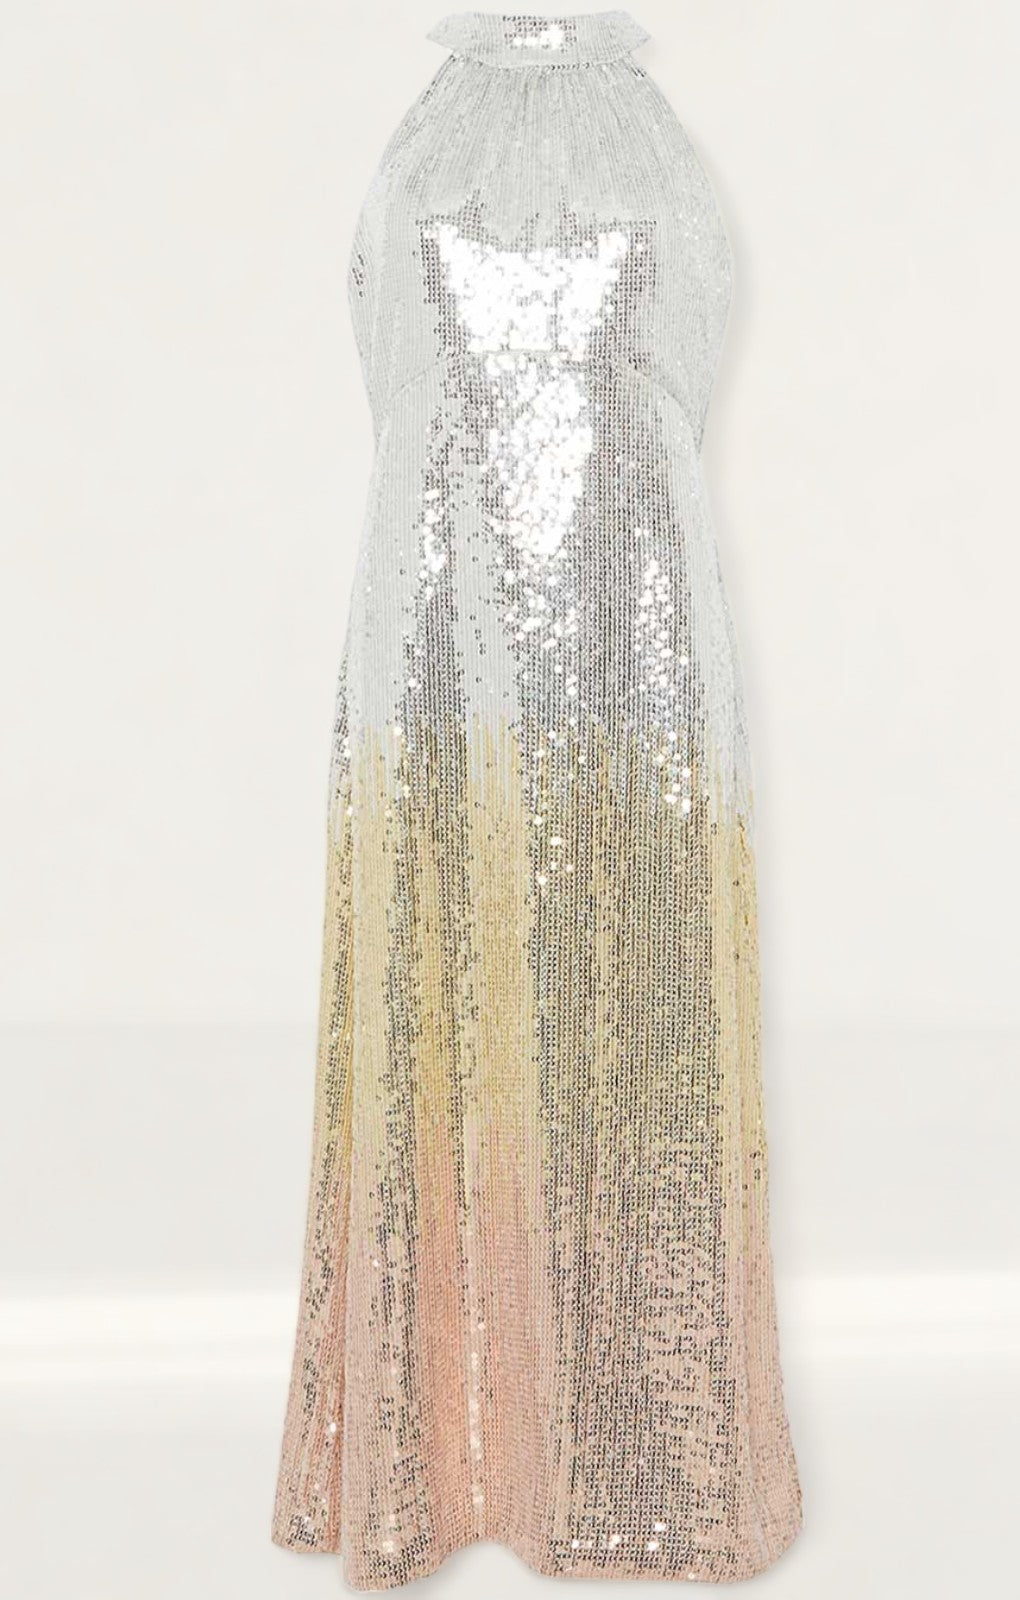 Oasis Hand Embellished Ombre Sequin Halter Midi Dress product image